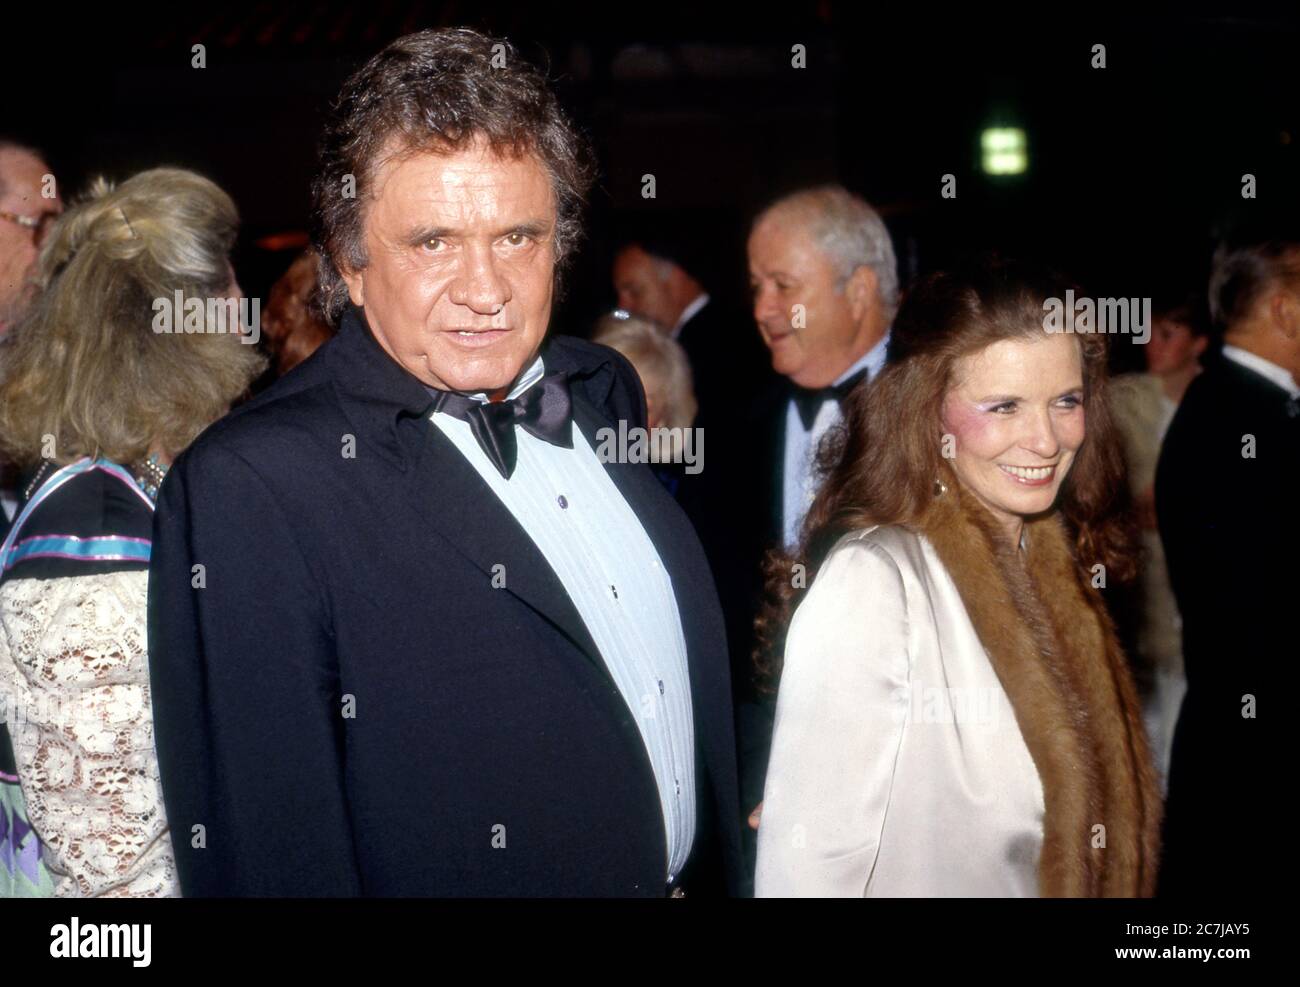 Johnny Cash, Ruth Carter Cash at Gene Autry Museum, Los Angeles, CA Stock Photo